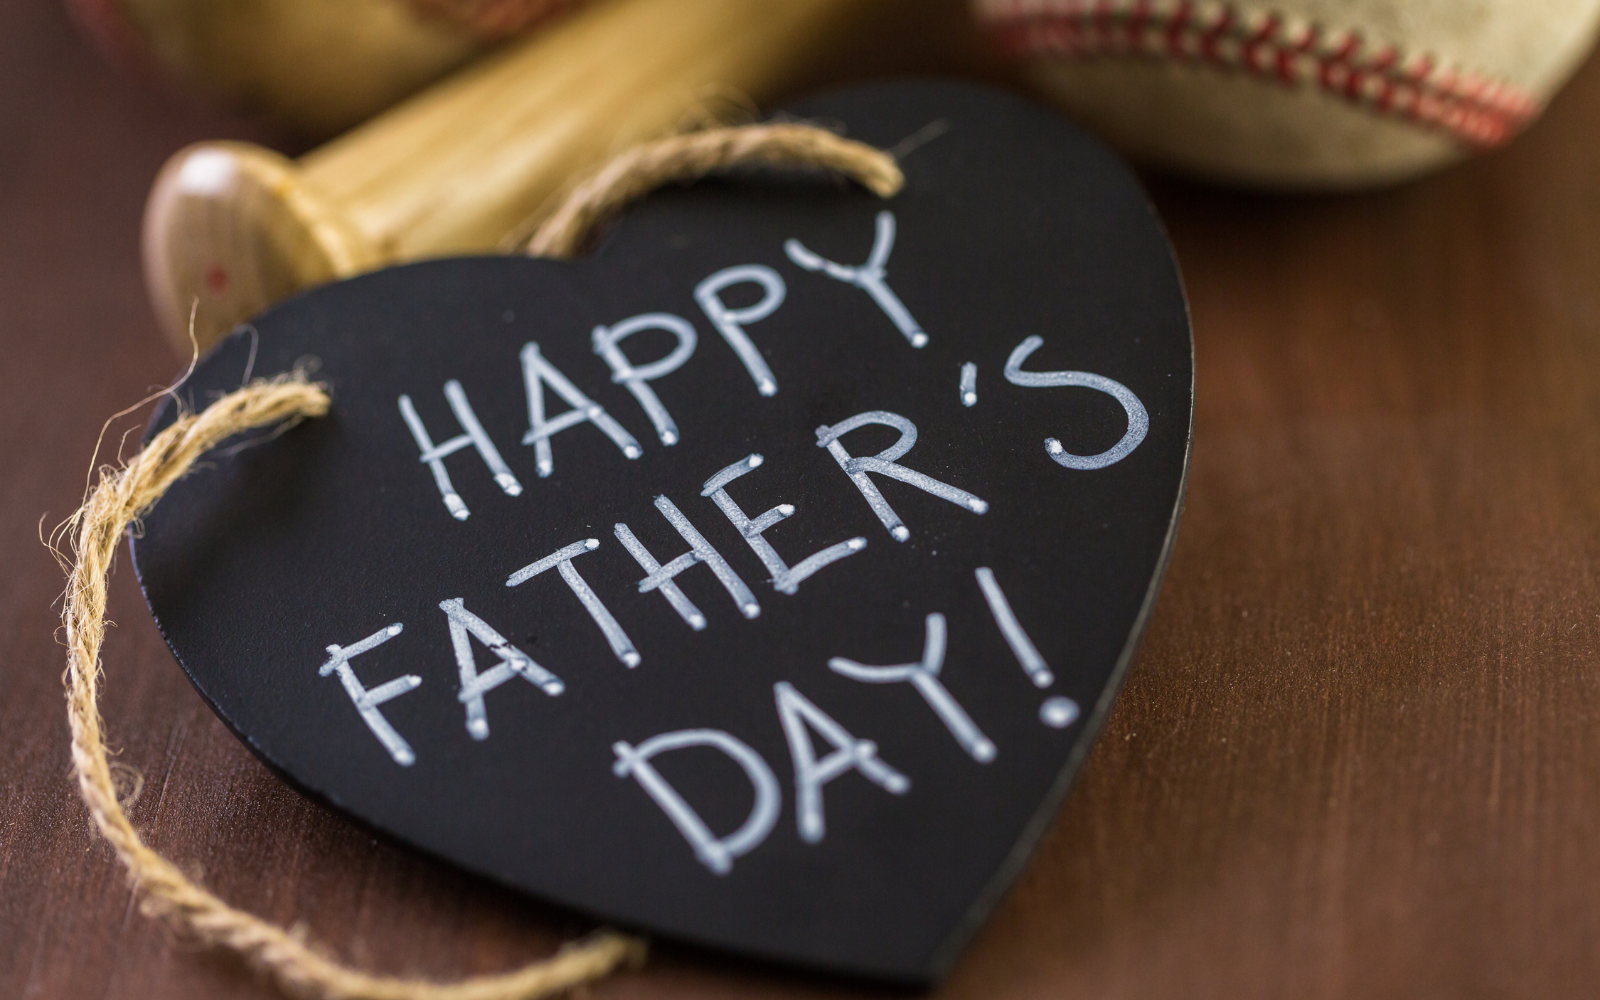 FATHER'S DAY ACTIVITIES FOR EVERY TYPE OF DAD